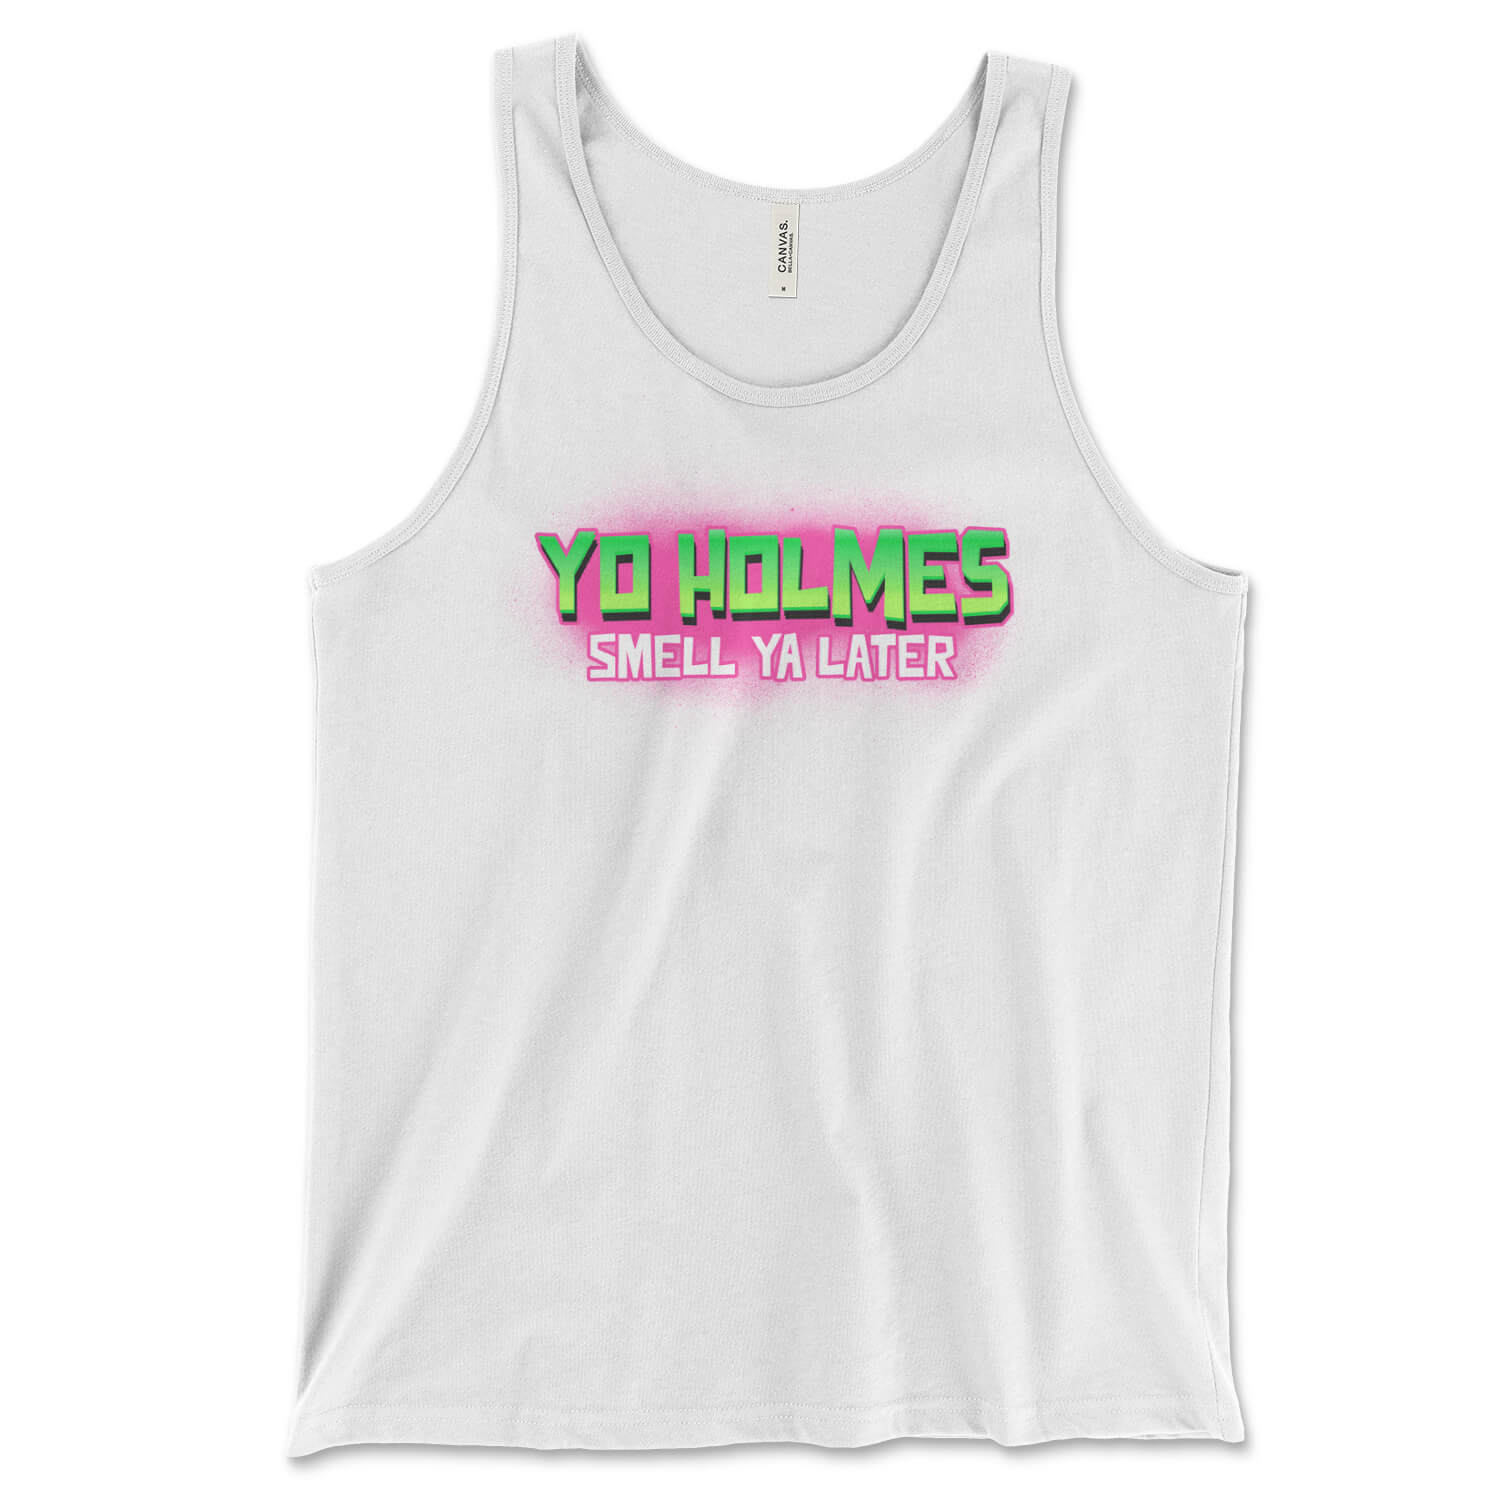 Fresh Prince of Bel-Air Yo Holmes Smell Ya Later white tank top from Phillygoat